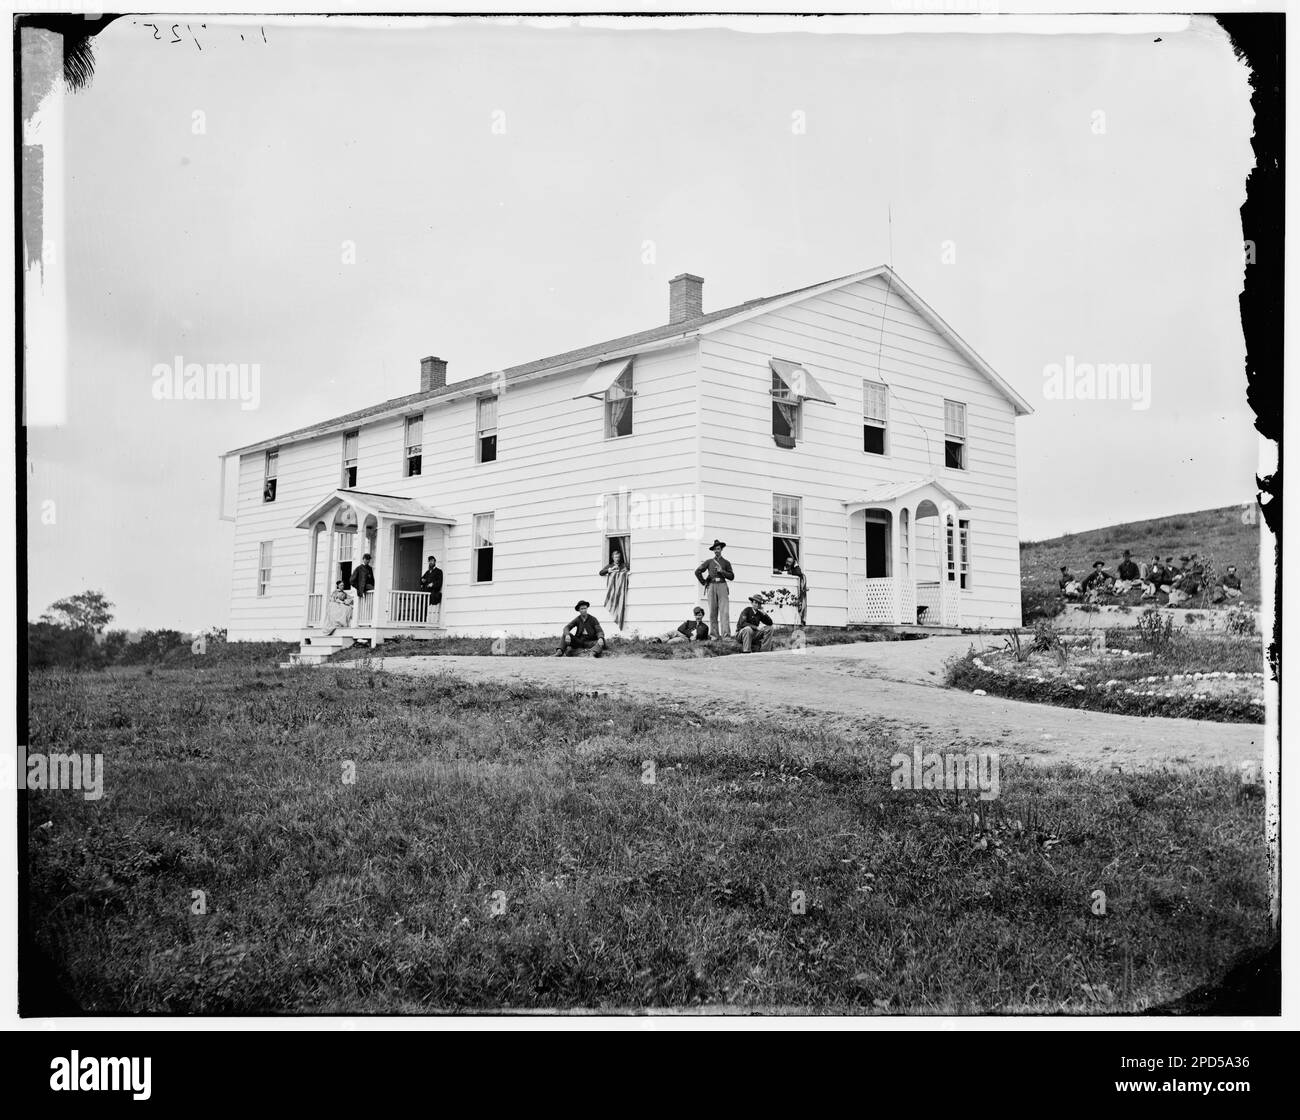 Washington, District of Columbia. Officers' quarters at Signal Corps camp near Georgetown. Civil war photographs, 1861-1865 . United States, History, Civil War, 1861-1865. Stock Photo